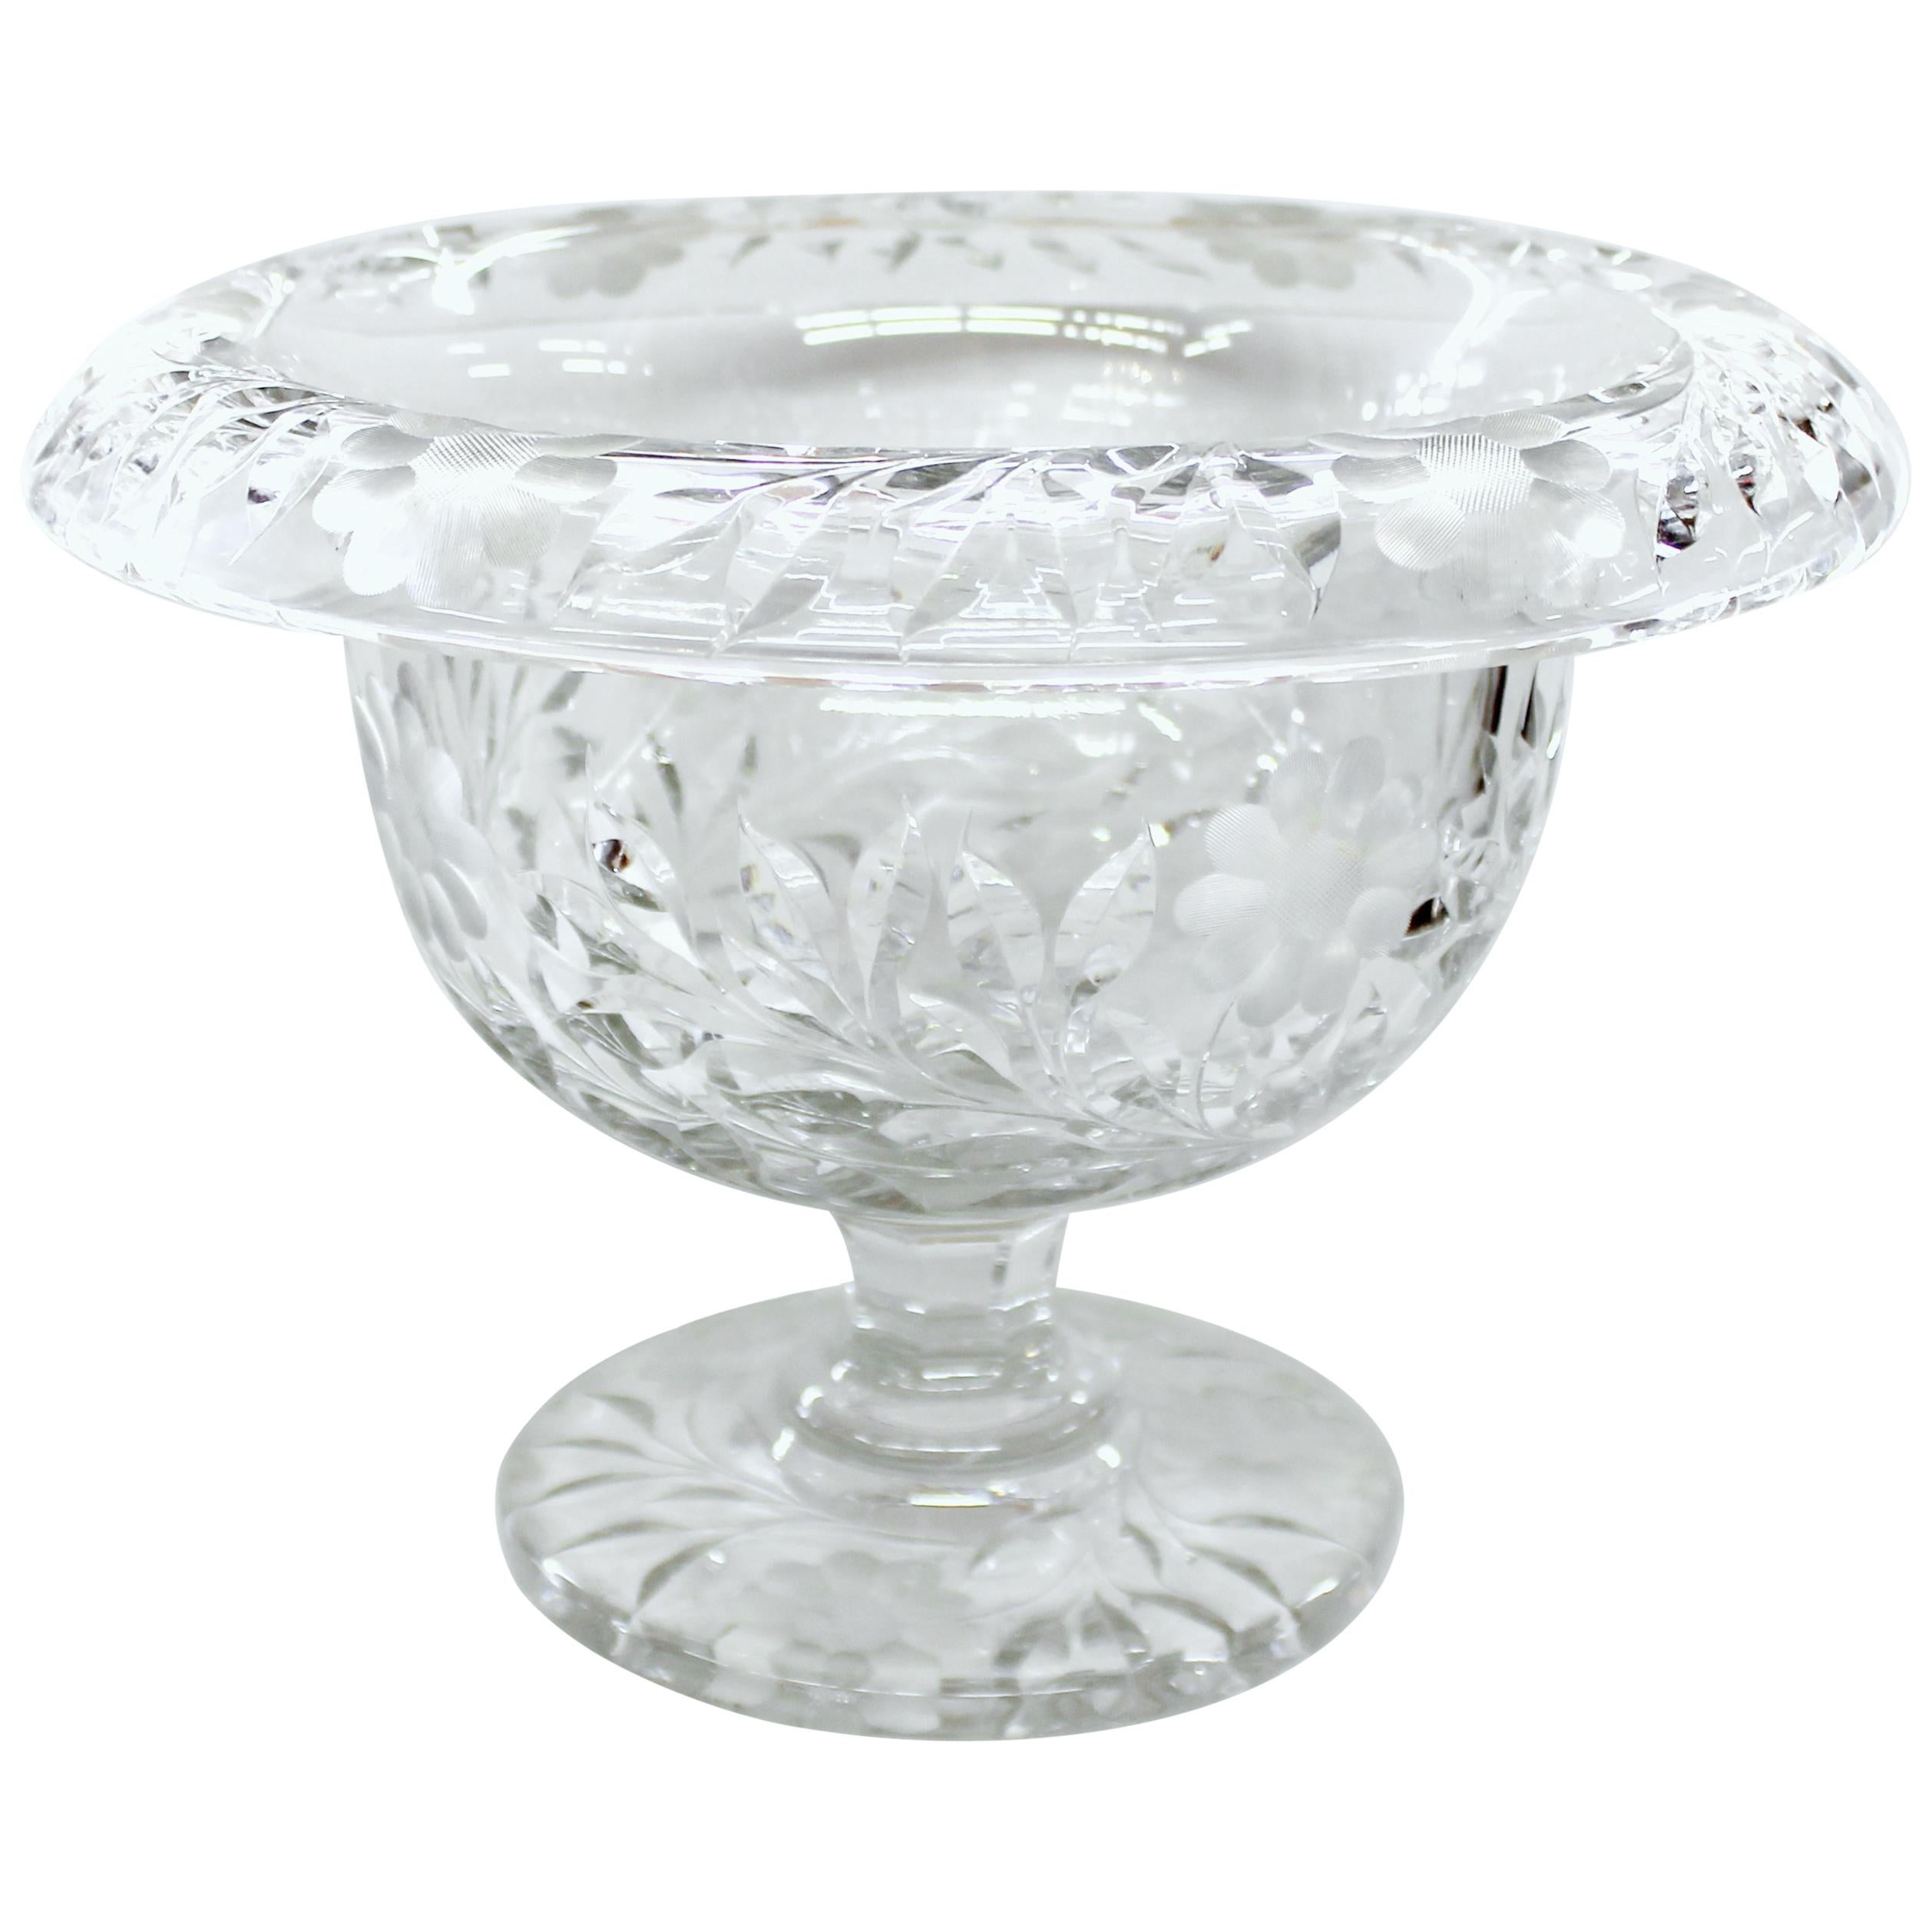 Large Old American Cut Crystal "Floral Period" Turnover Bowl or Compote